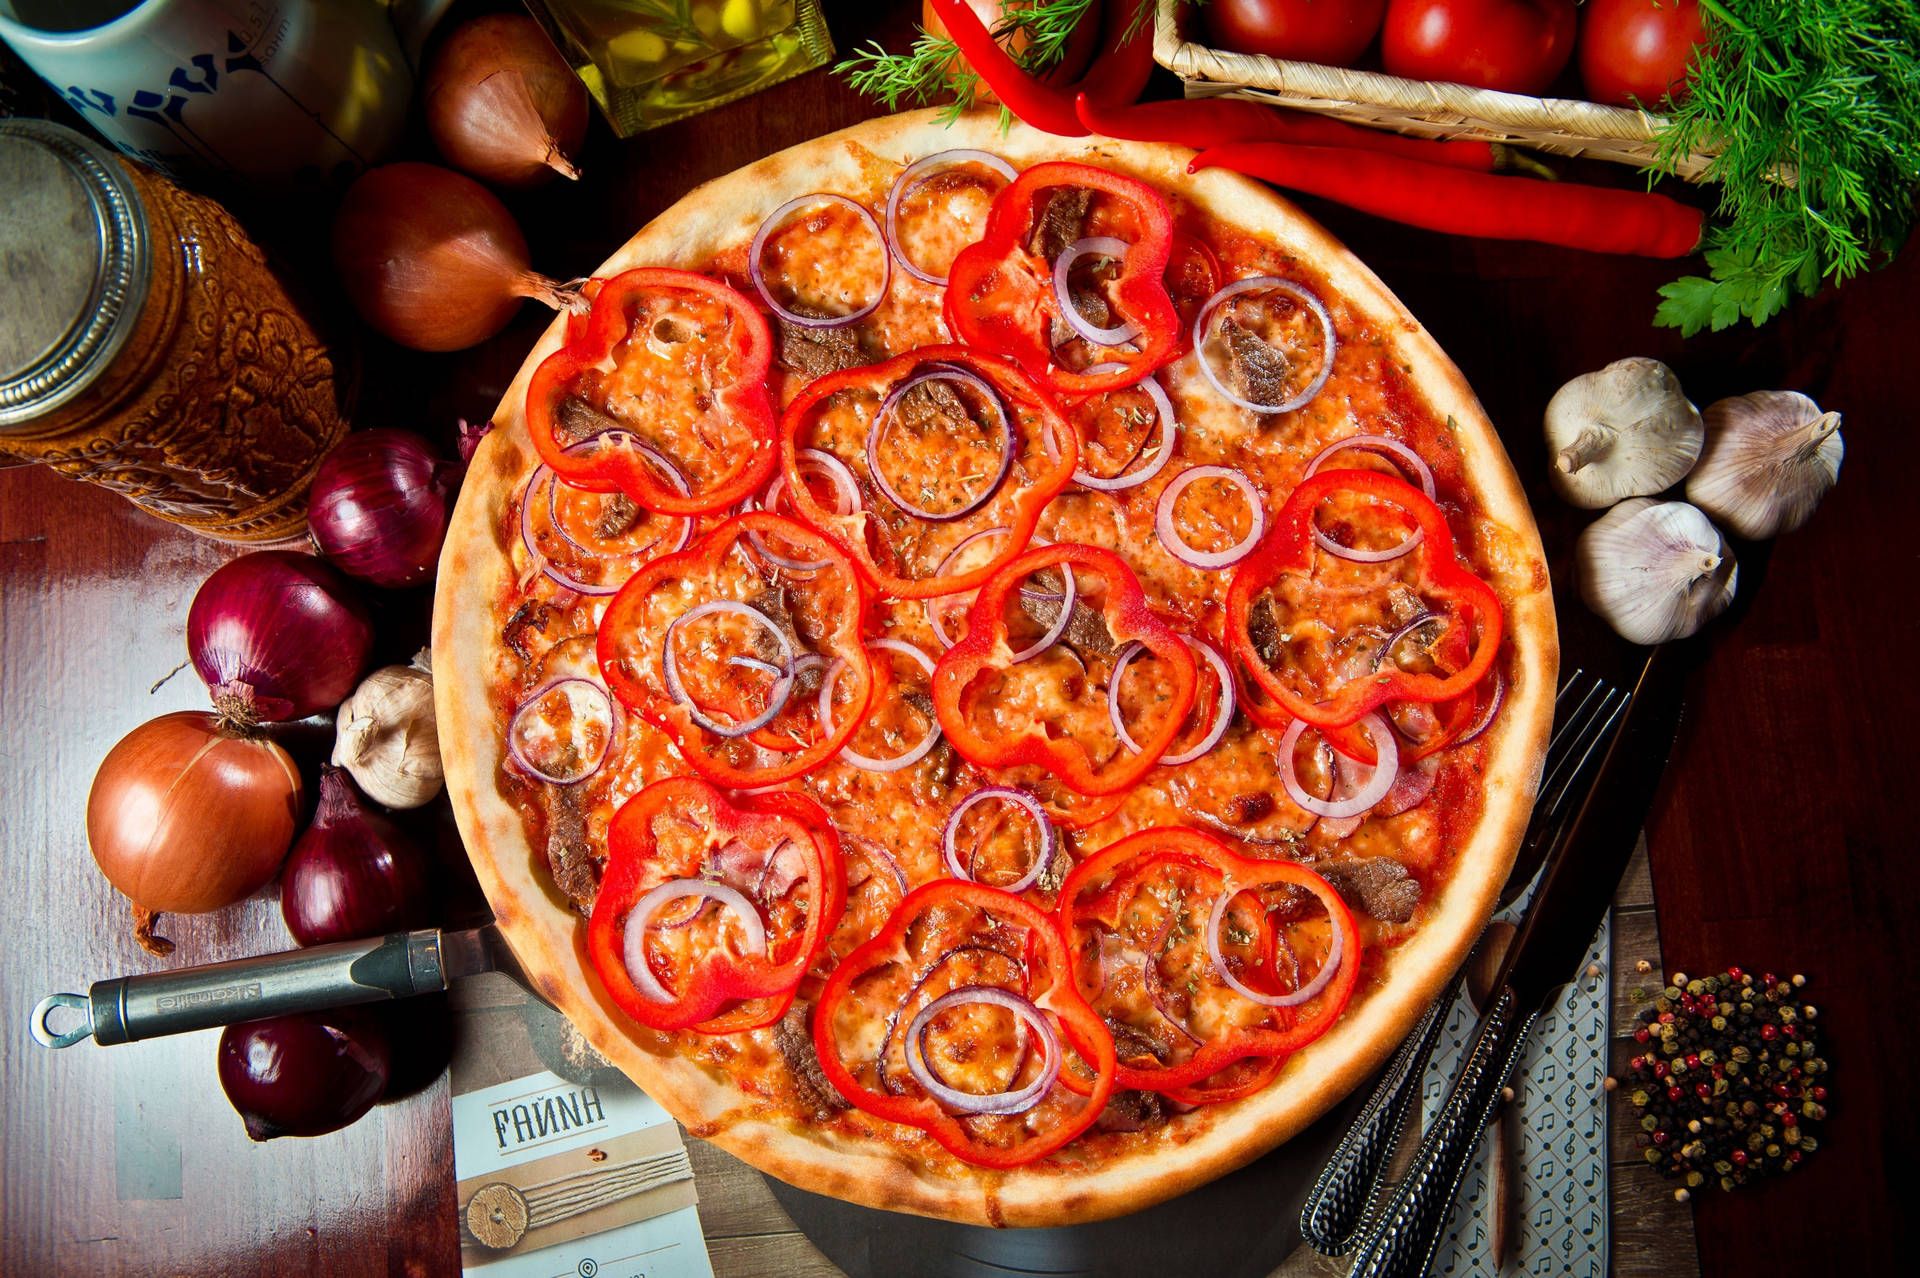 A pizza with tomatoes, onions, and peppers on a wooden table. - Pizza